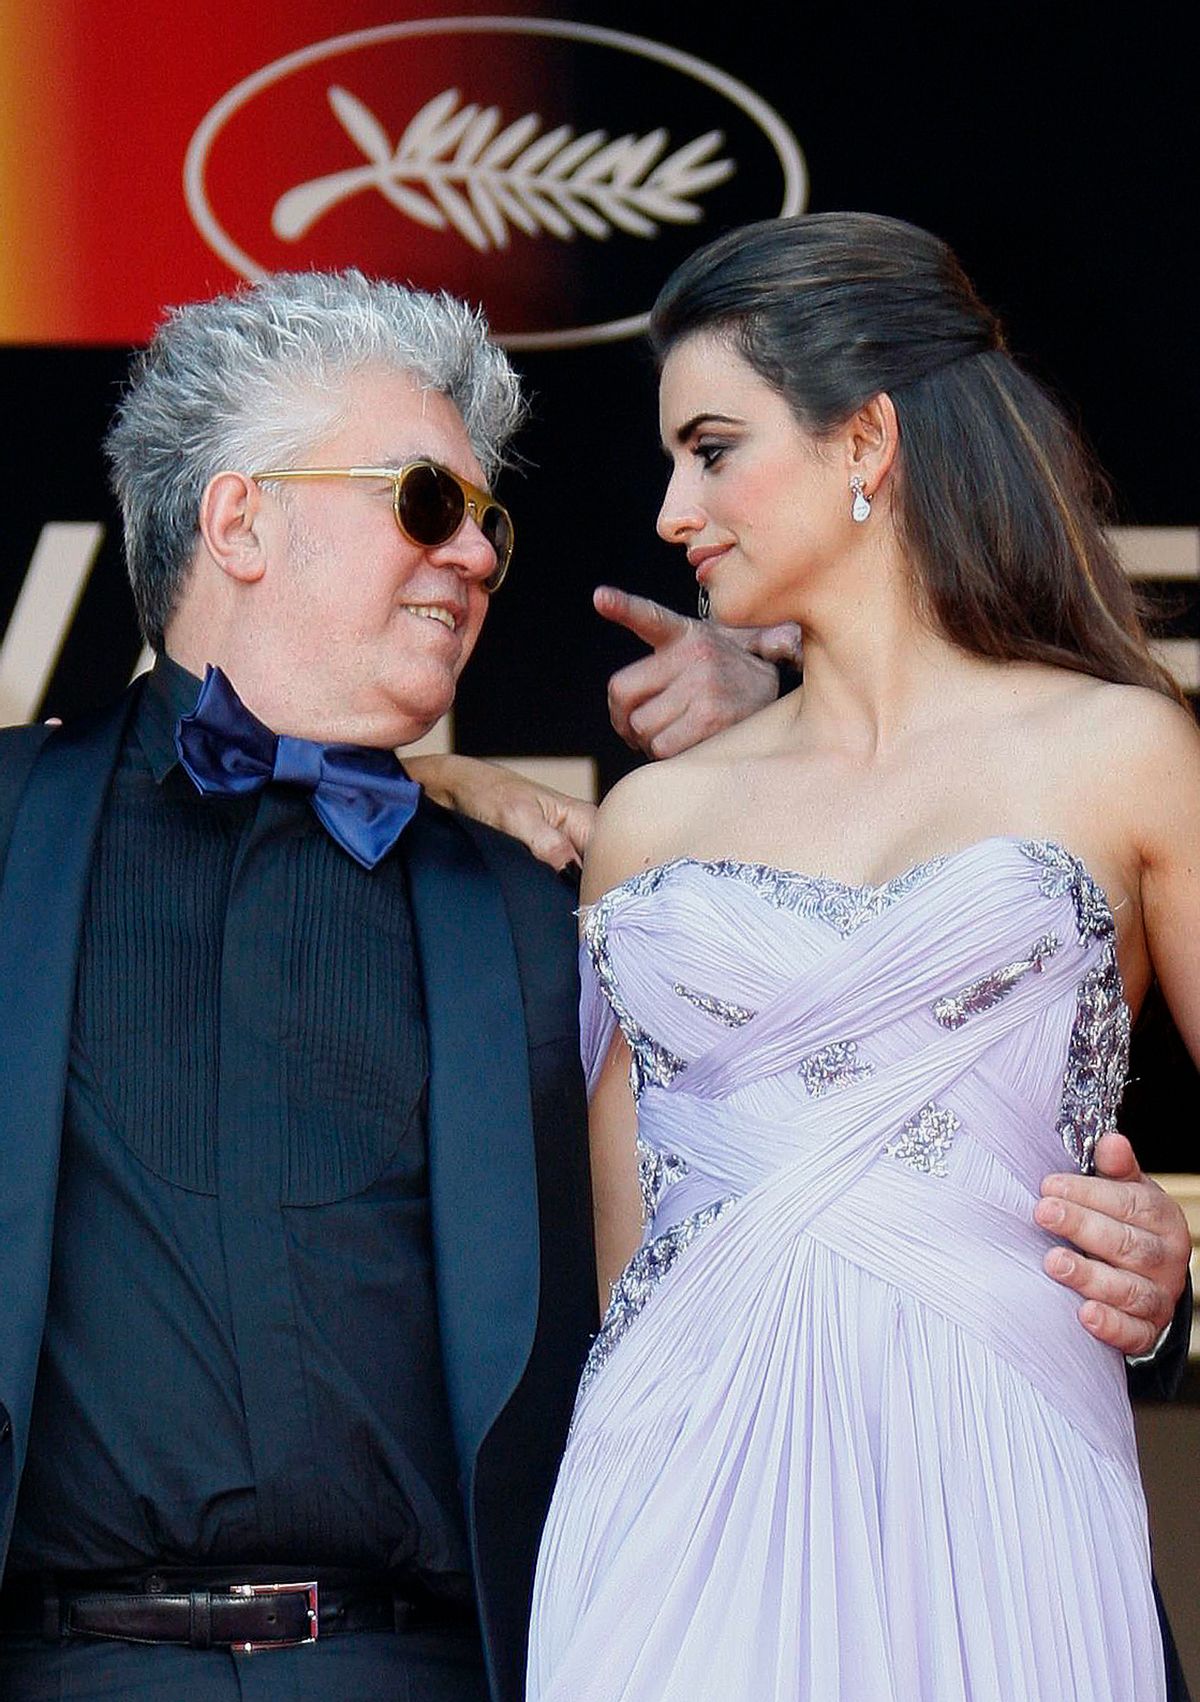 Director Pedro Almodovar (L) and cast member Penelope Cruz arrive on the red carpet for the screening of the film "Los Abrazos Rotos" at the 62nd Cannes Film Festival May 19, 2009. Twenty films compete for the prestigious Palme d'Or which will be awarded on May 24.    REUTERS/Regis Duvignau (FRANCE ENTERTAINMENT)      (Reuters)